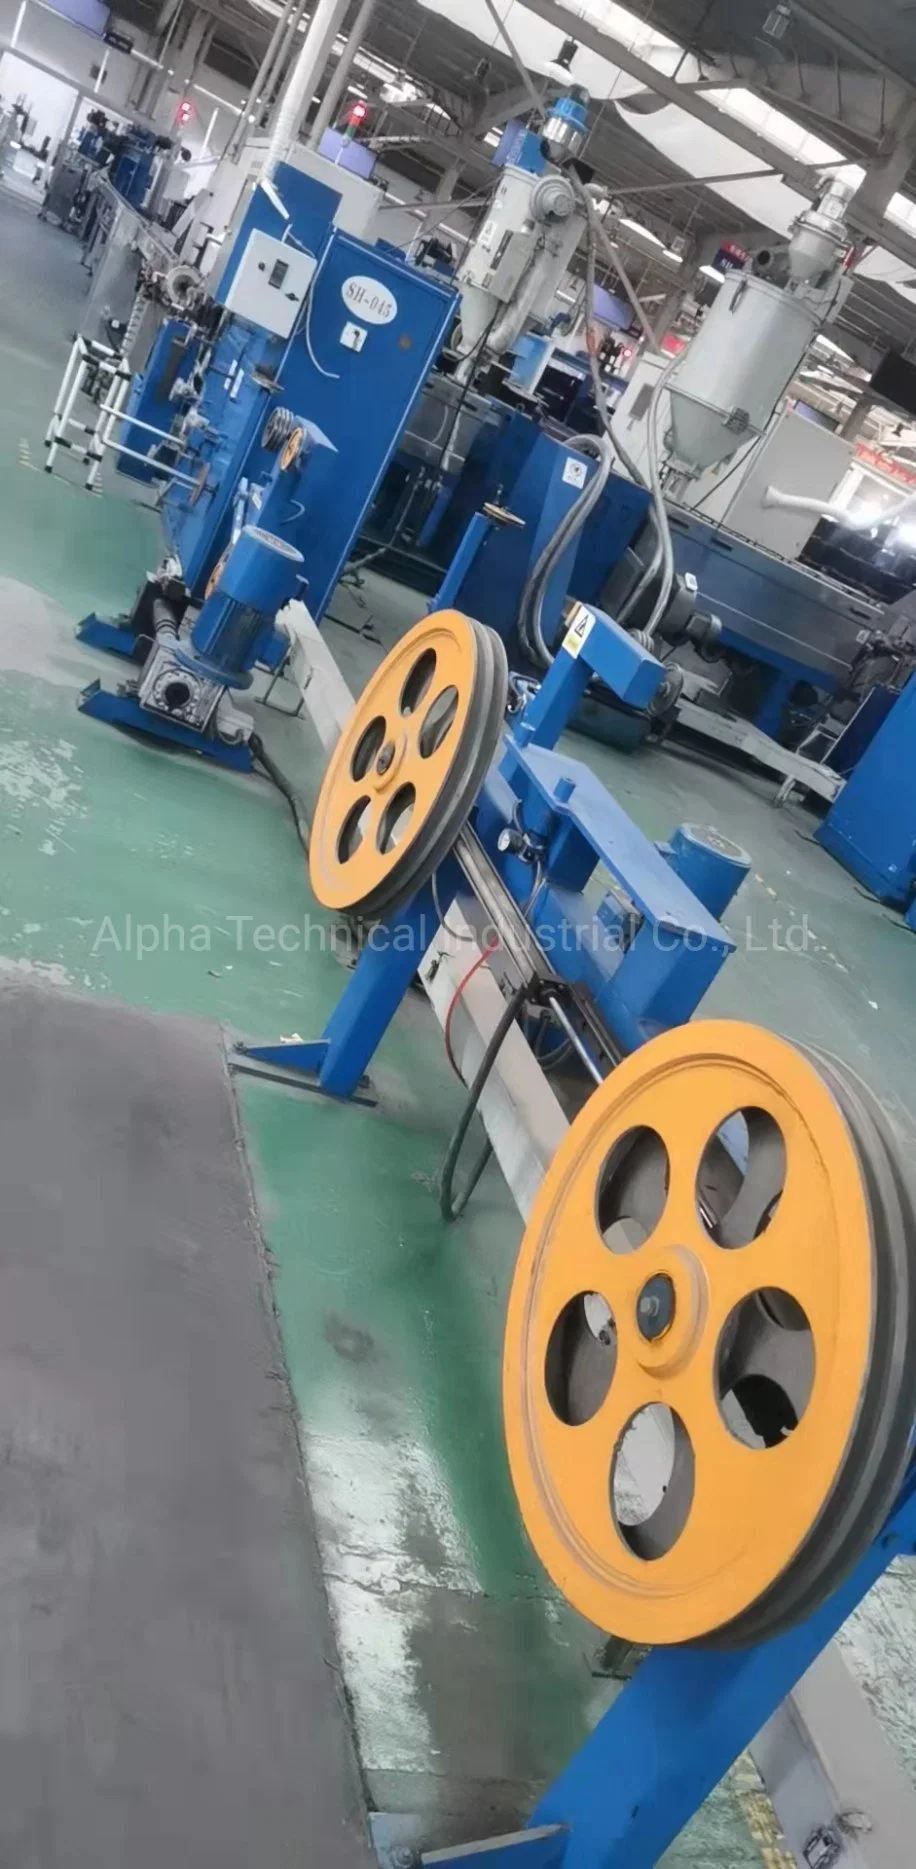 Optic Cable Outer Sheathing Extrusion Production Line for Butterfly-Shaped Fiber Optical Cables^